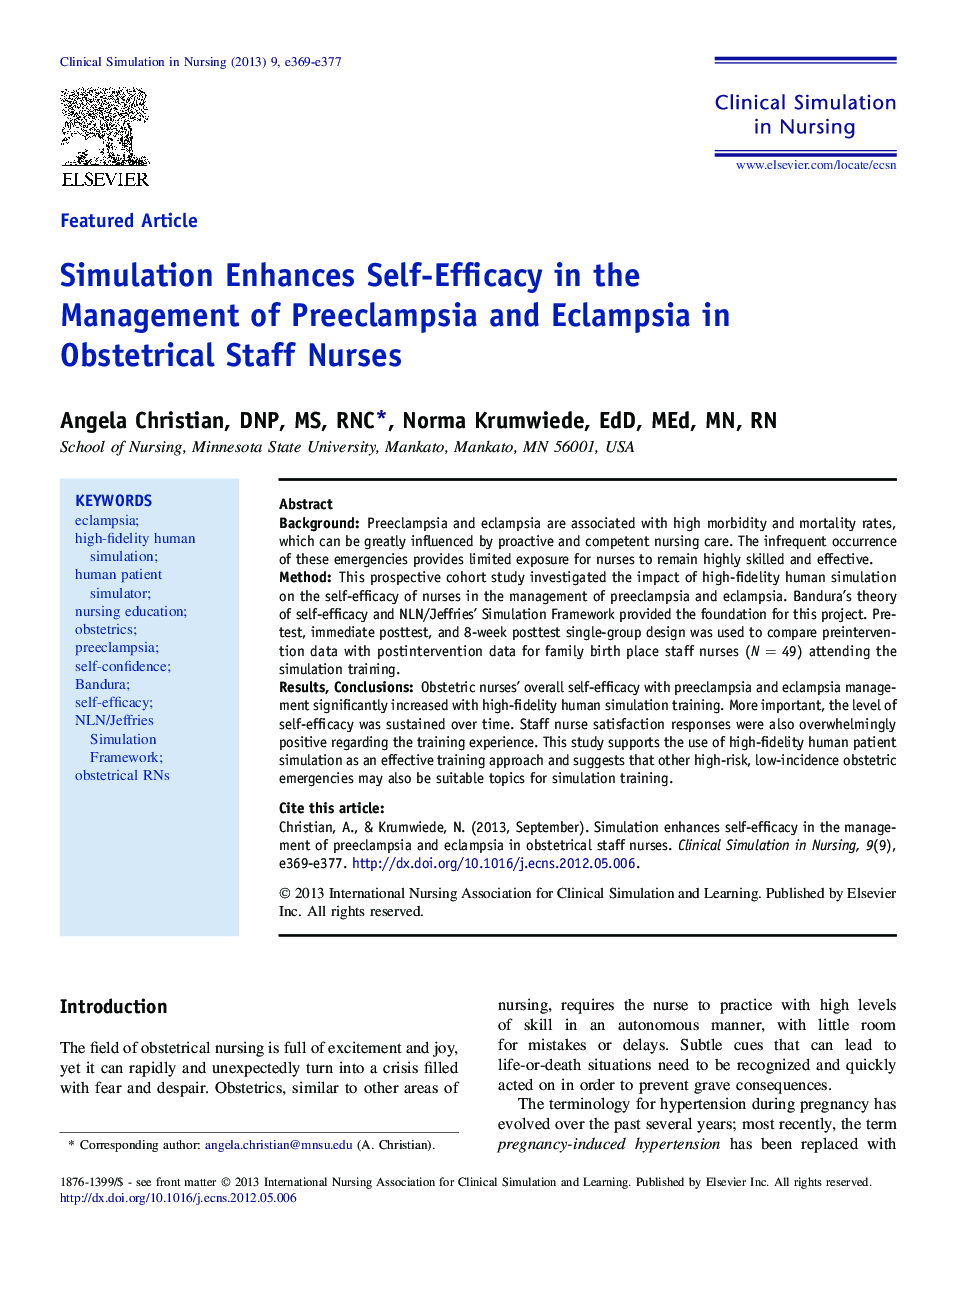 Simulation Enhances Self-Efficacy in the Management of Preeclampsia and Eclampsia in Obstetrical Staff Nurses